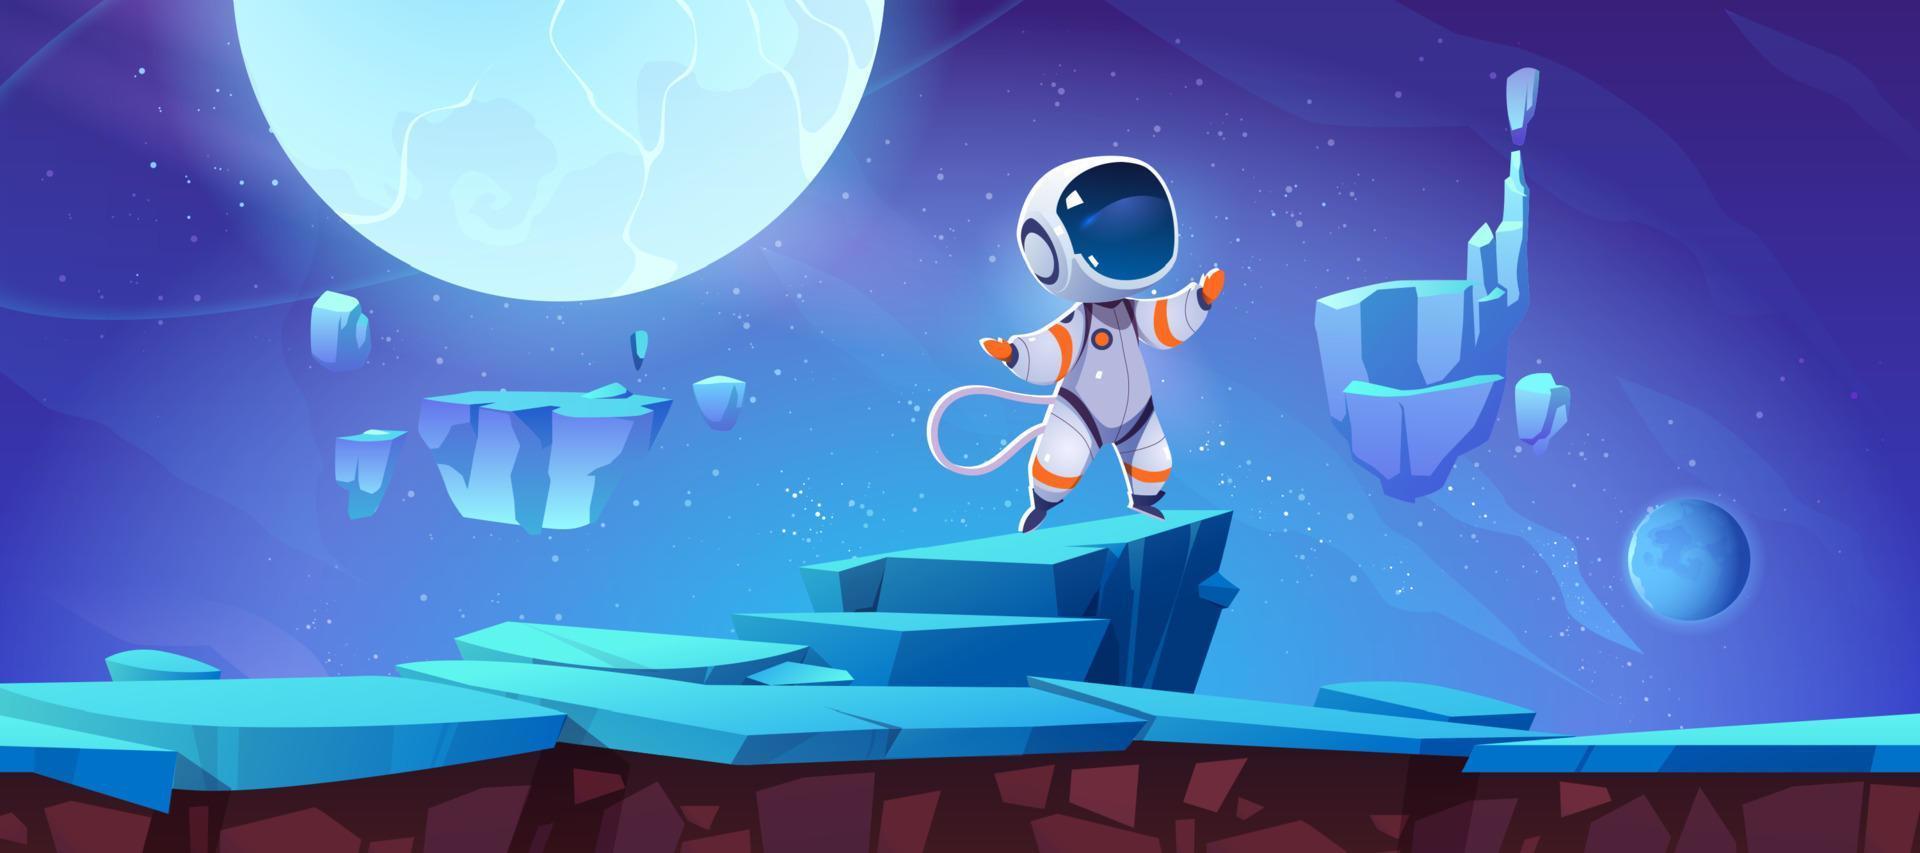 Game ground platform with spaceman on alien planet vector